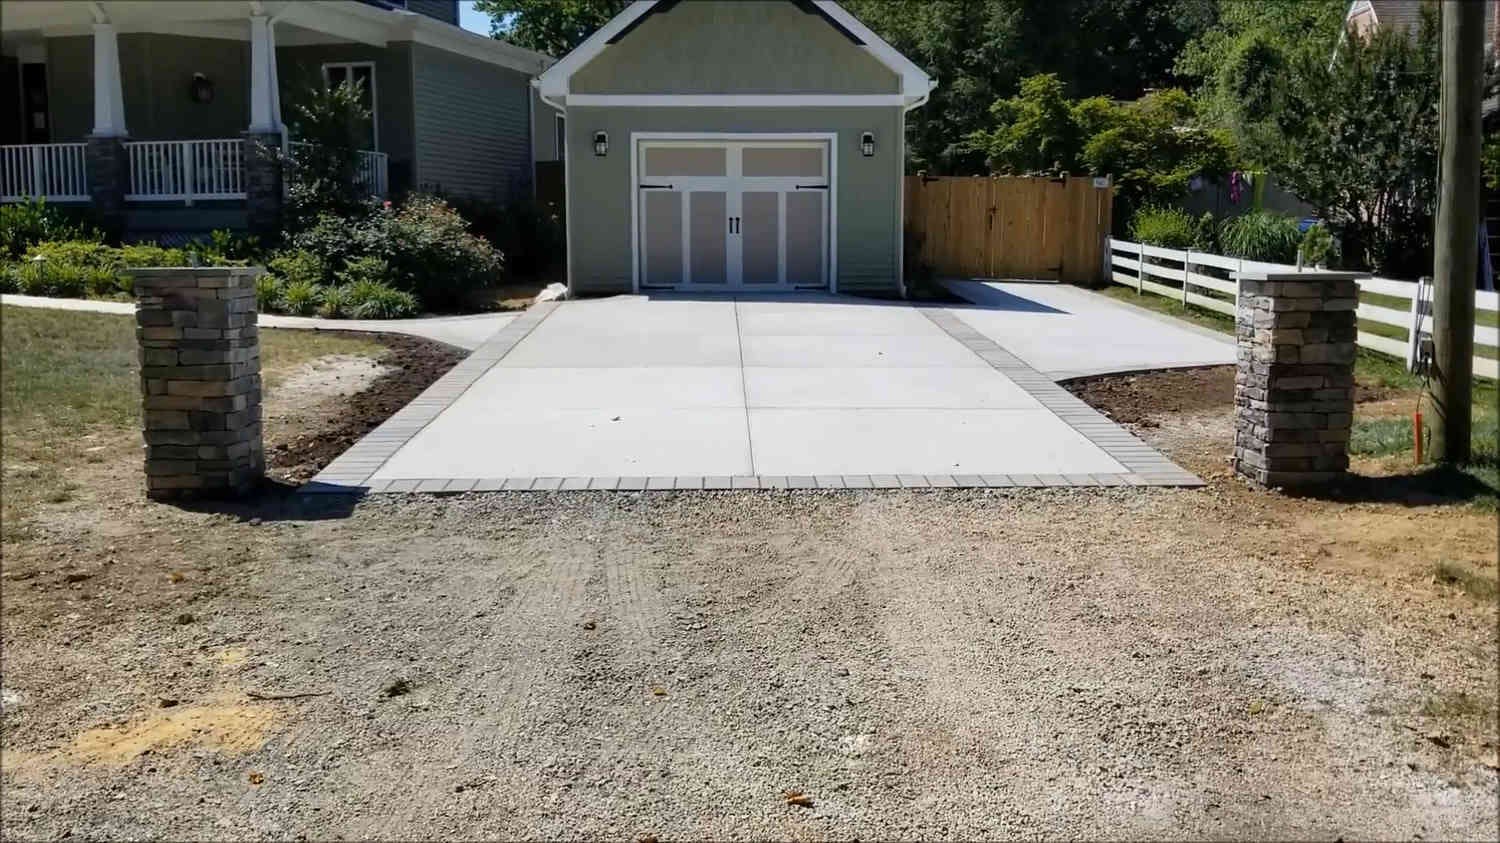 New concrete driveway leading up to a single car garage in Oakland, CA.